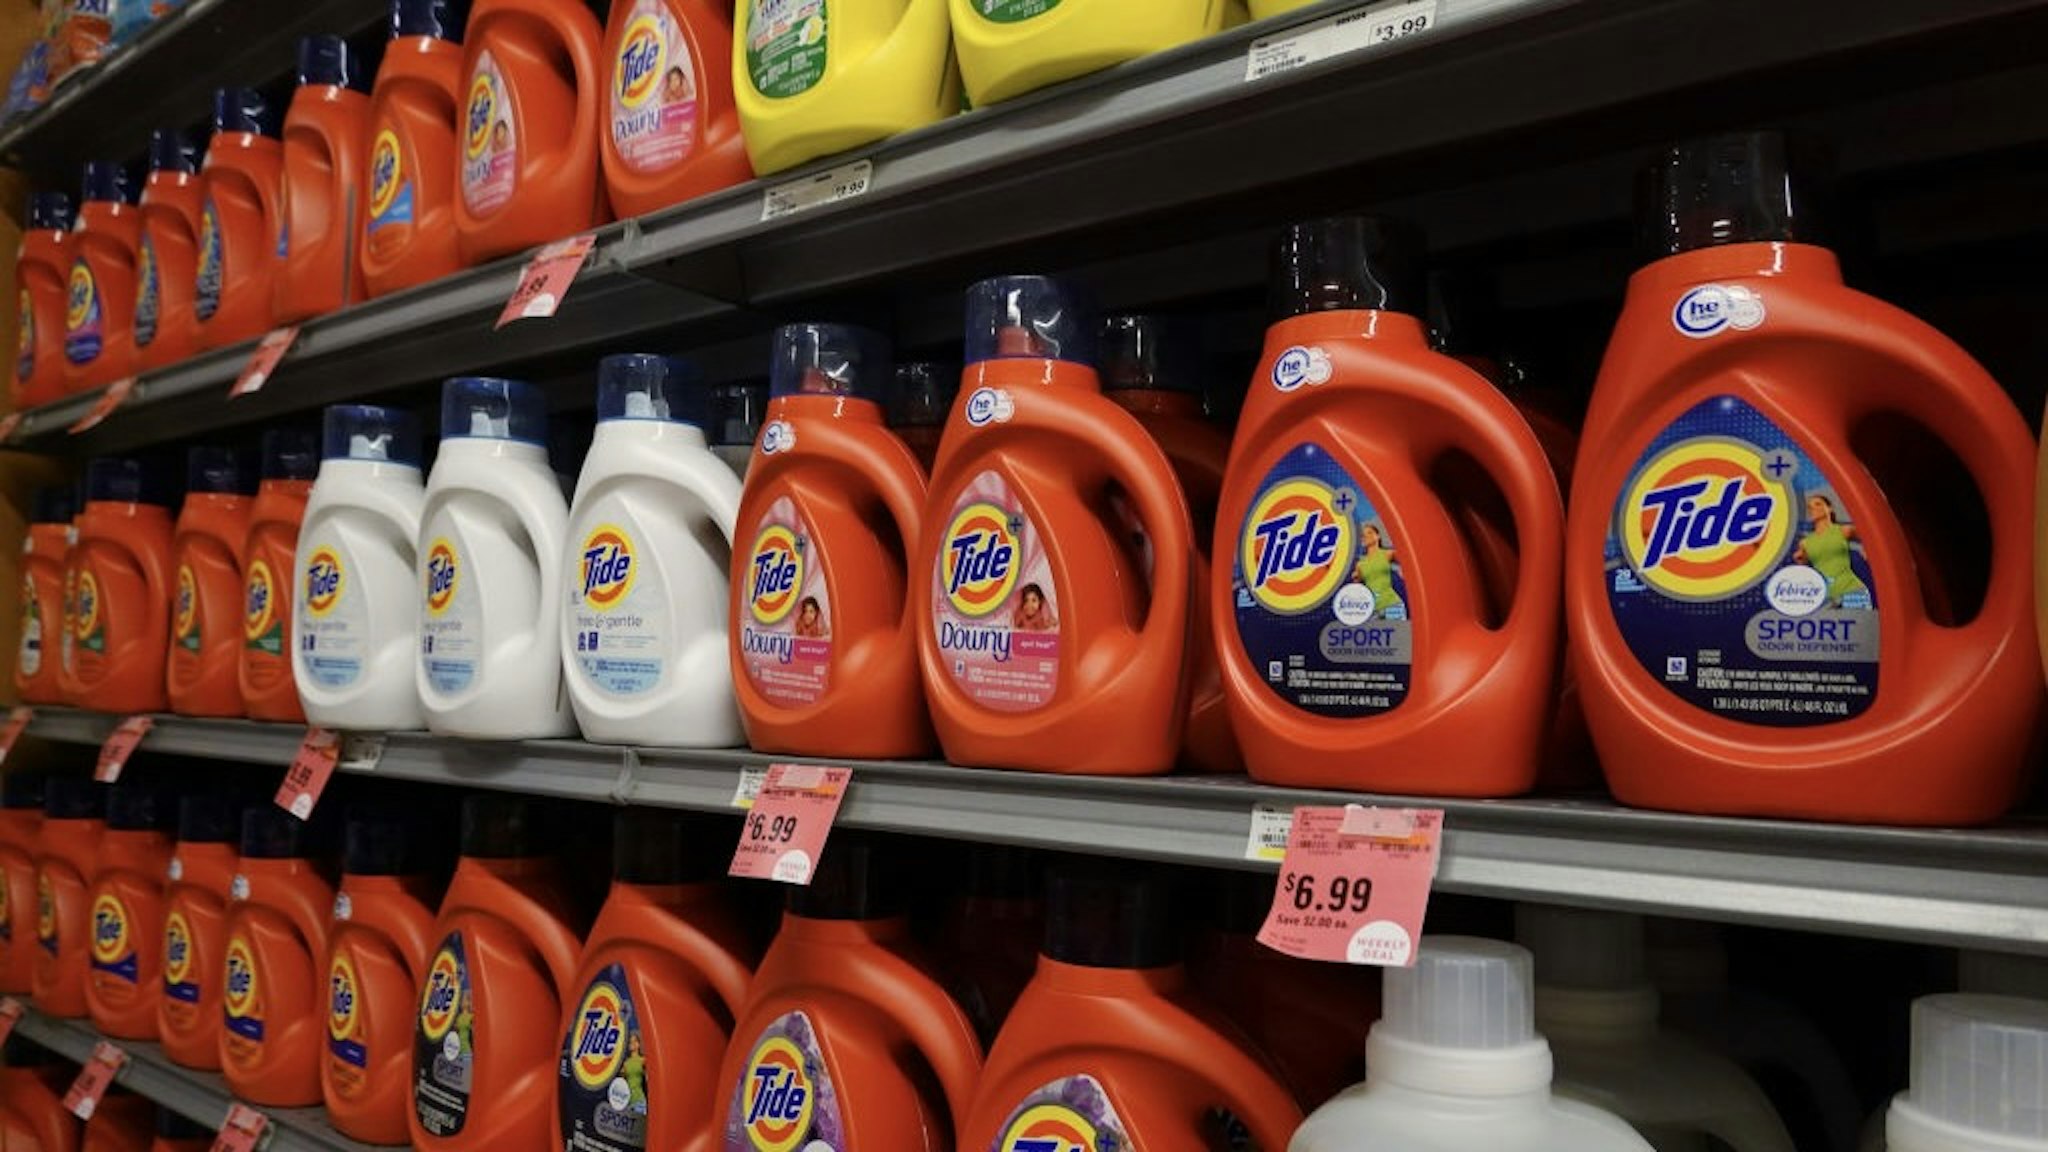 Proctor And Gamble Report Strong Earnings As Cleaning Supplies In High Demand During Pandemic MIAMI, FLORIDA - OCTOBER 20: Tide, a laundry detergent owned by the Procter & Gamble company, is seen on a store shelf on October 20, 2020 in Miami, Florida. The company announced that sales growth rose 9% in the quarter that ended Sept. 30. Sales grew in each of P&G’s business units, as consumers bought their products as they do more dishes, laundry and cleaning at home during the coronavirus pandemic. (Photo by Joe Raedle/Getty Images) Joe Raedle / Staff